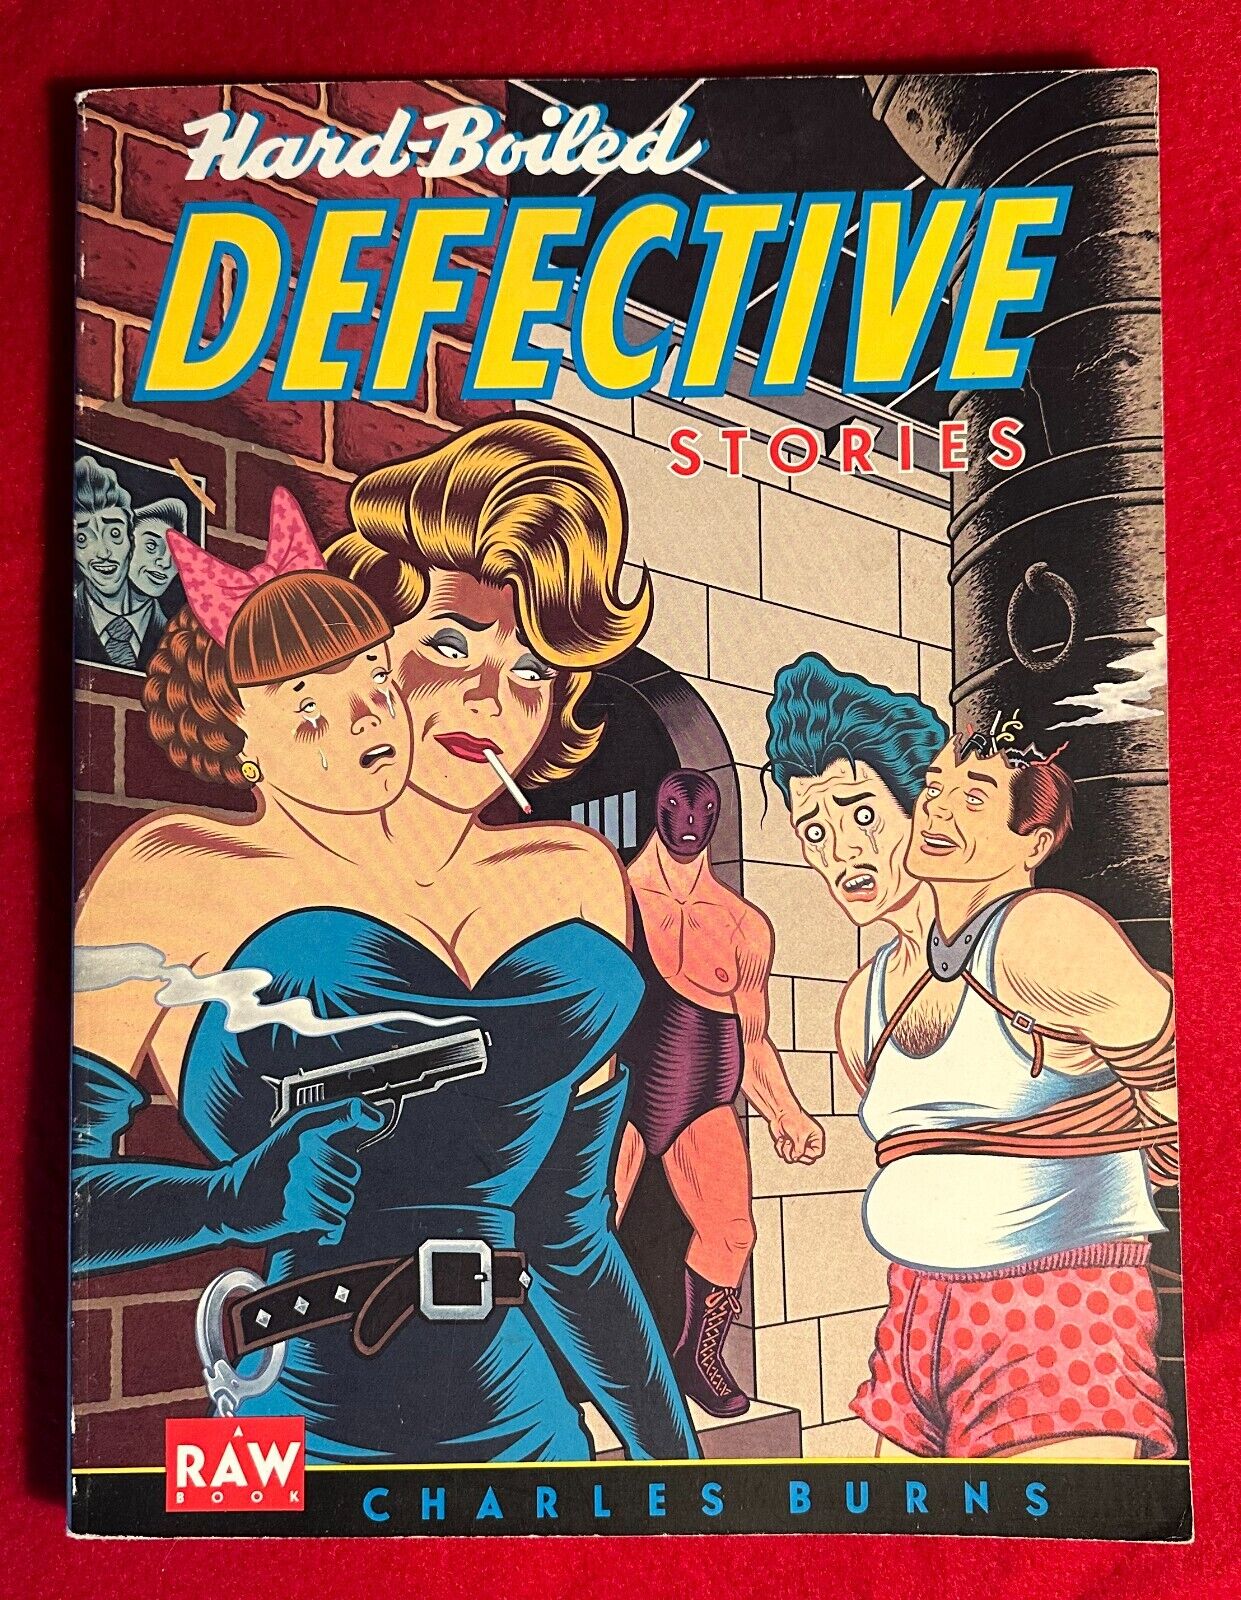 Hard-Boiled DETECTIVE Stories by Charles Burns 1988 good condition